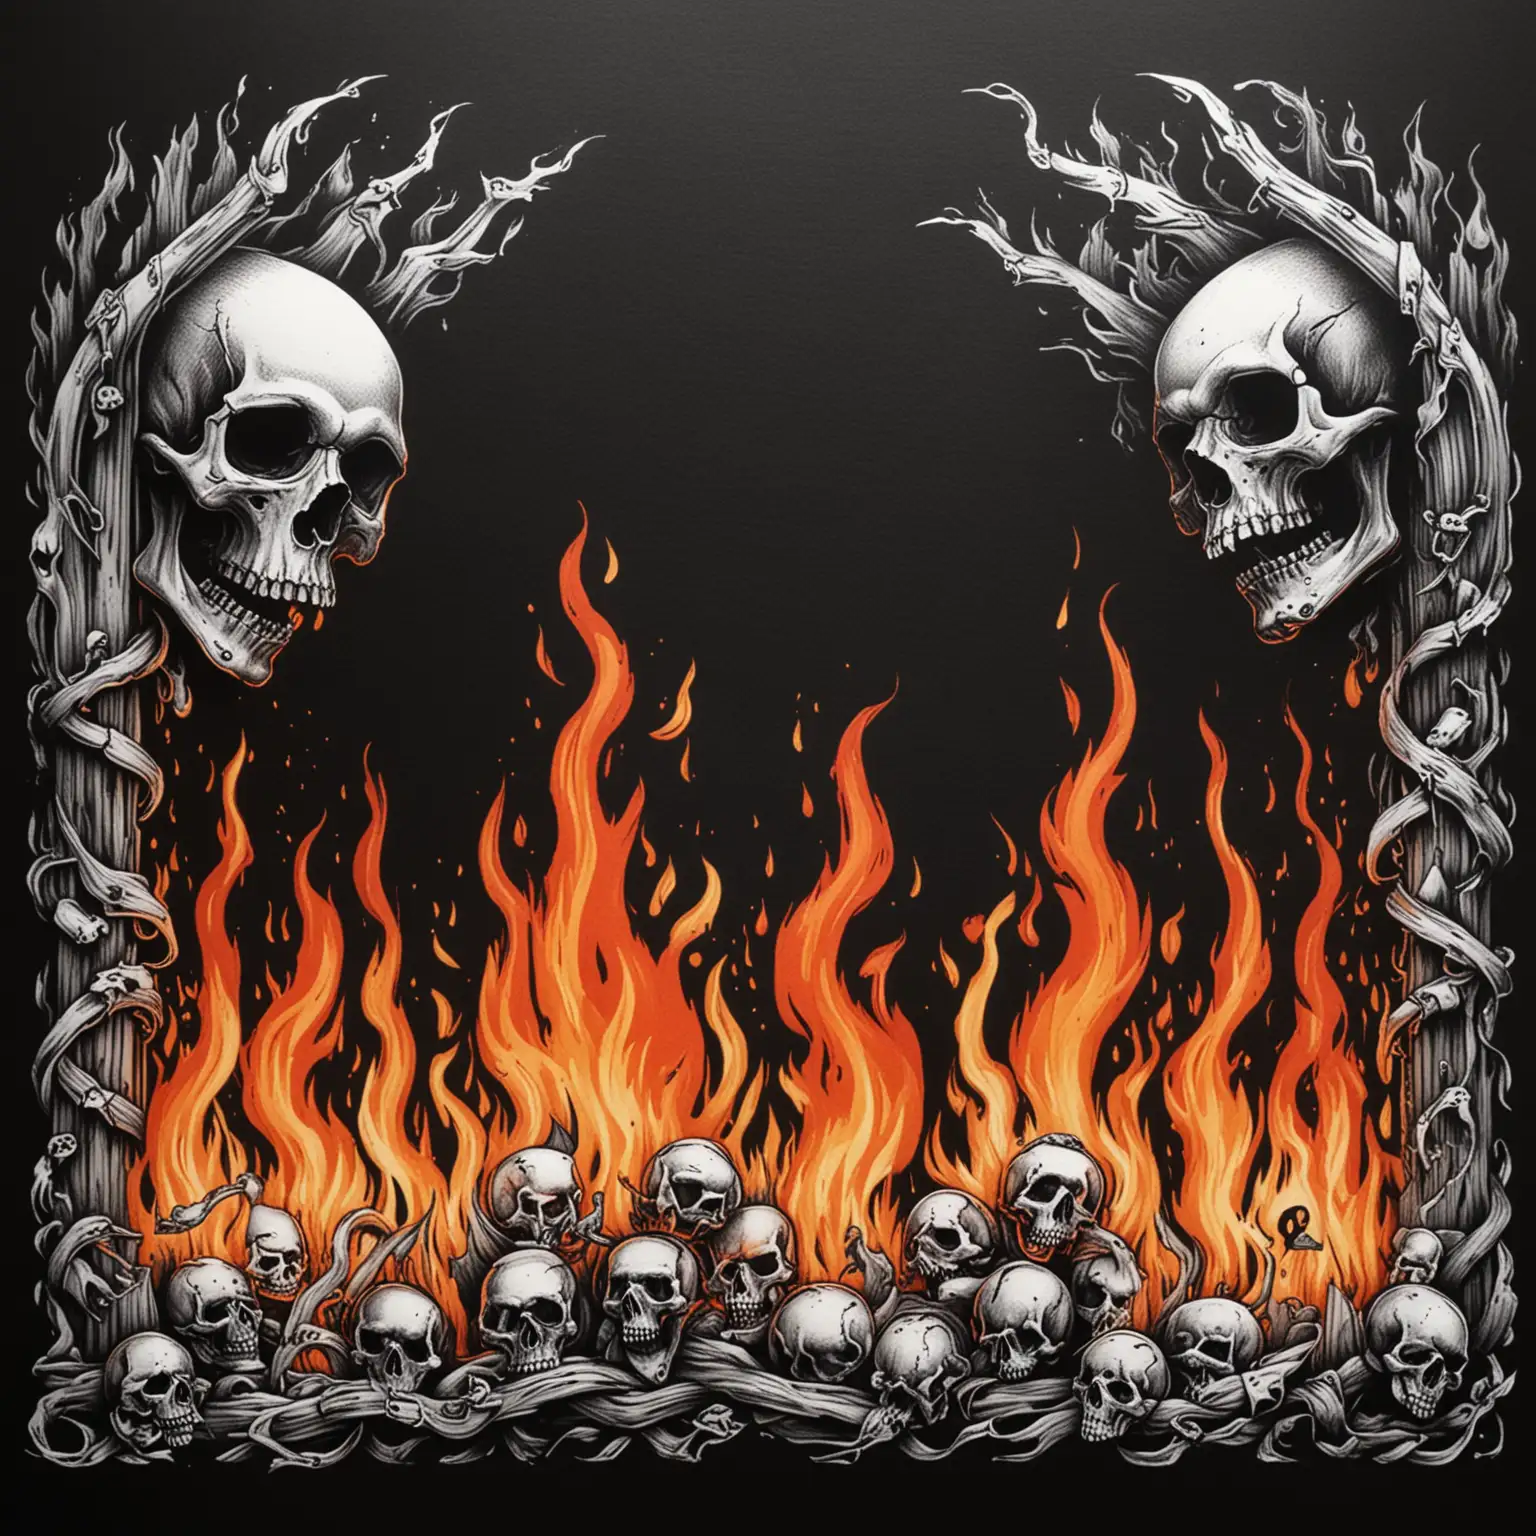 simple hand drawn flames and skulls done as border art like artist Banksy